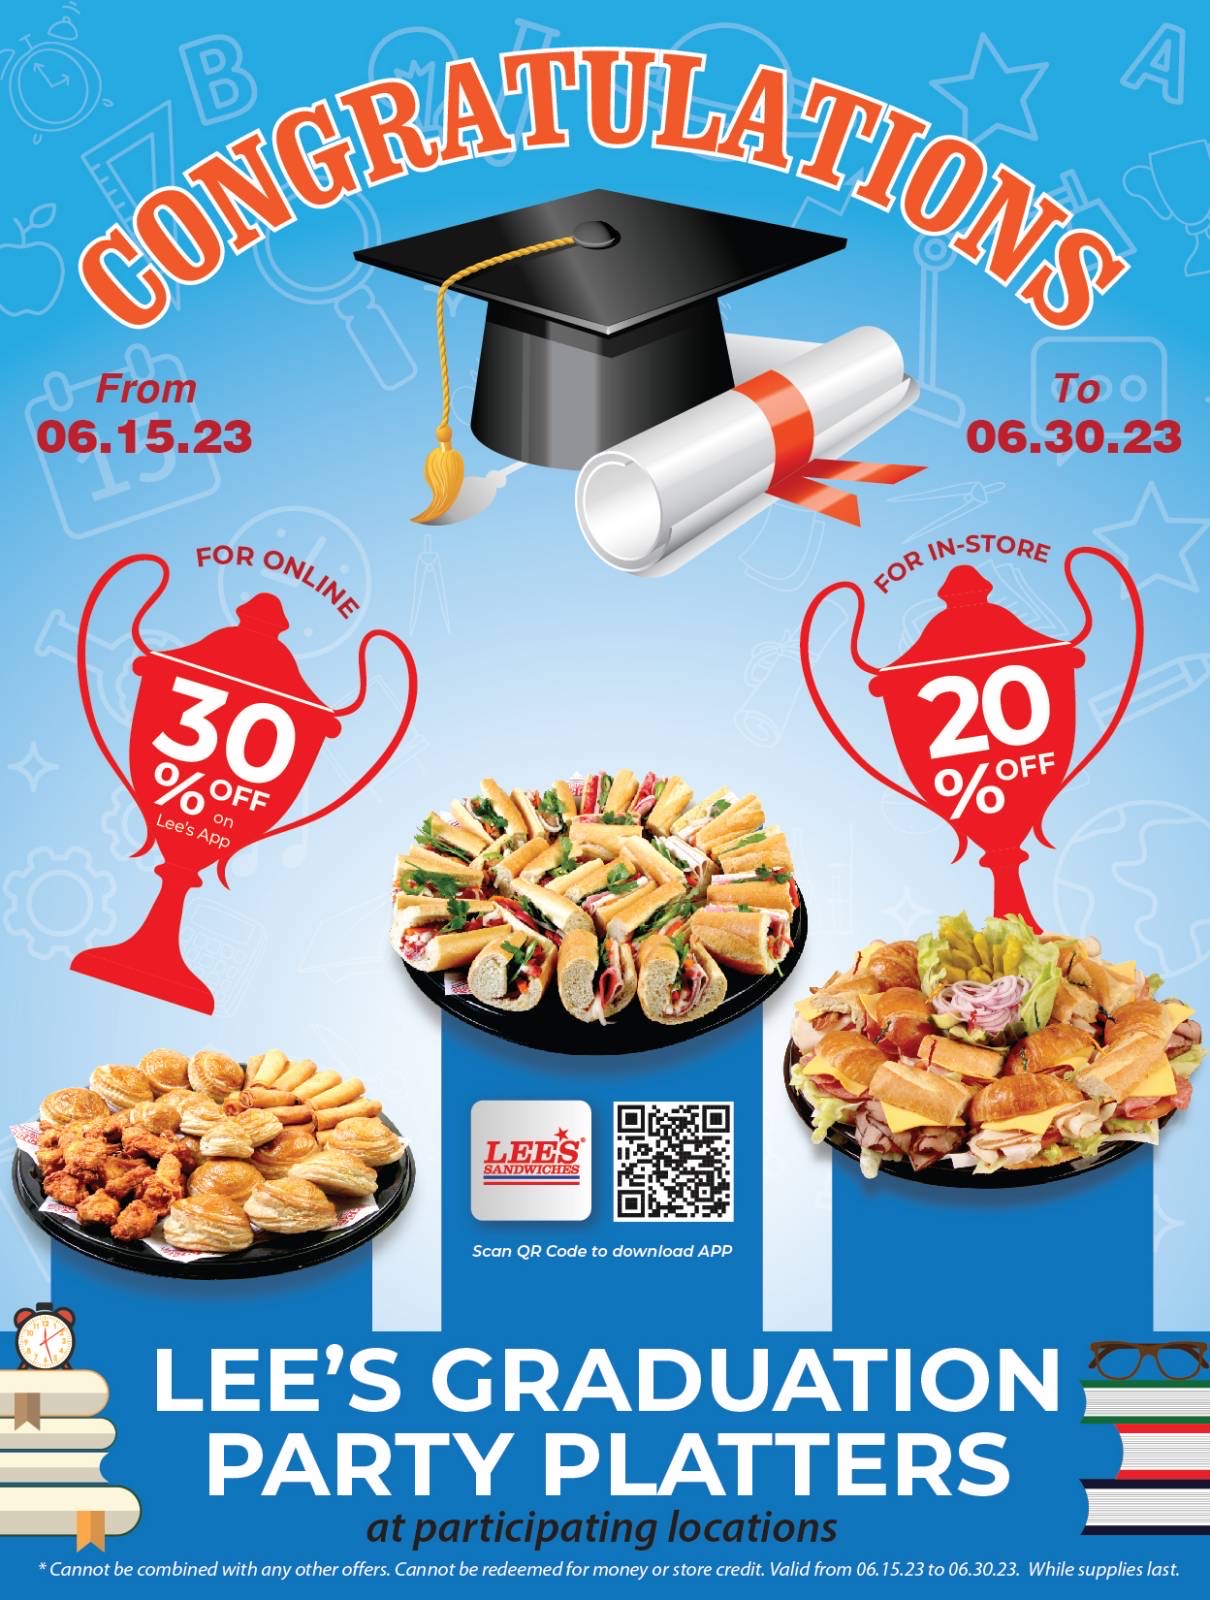 Congratulations! Have a great graduation with our special deals from 06/15/23 to 06/30/23